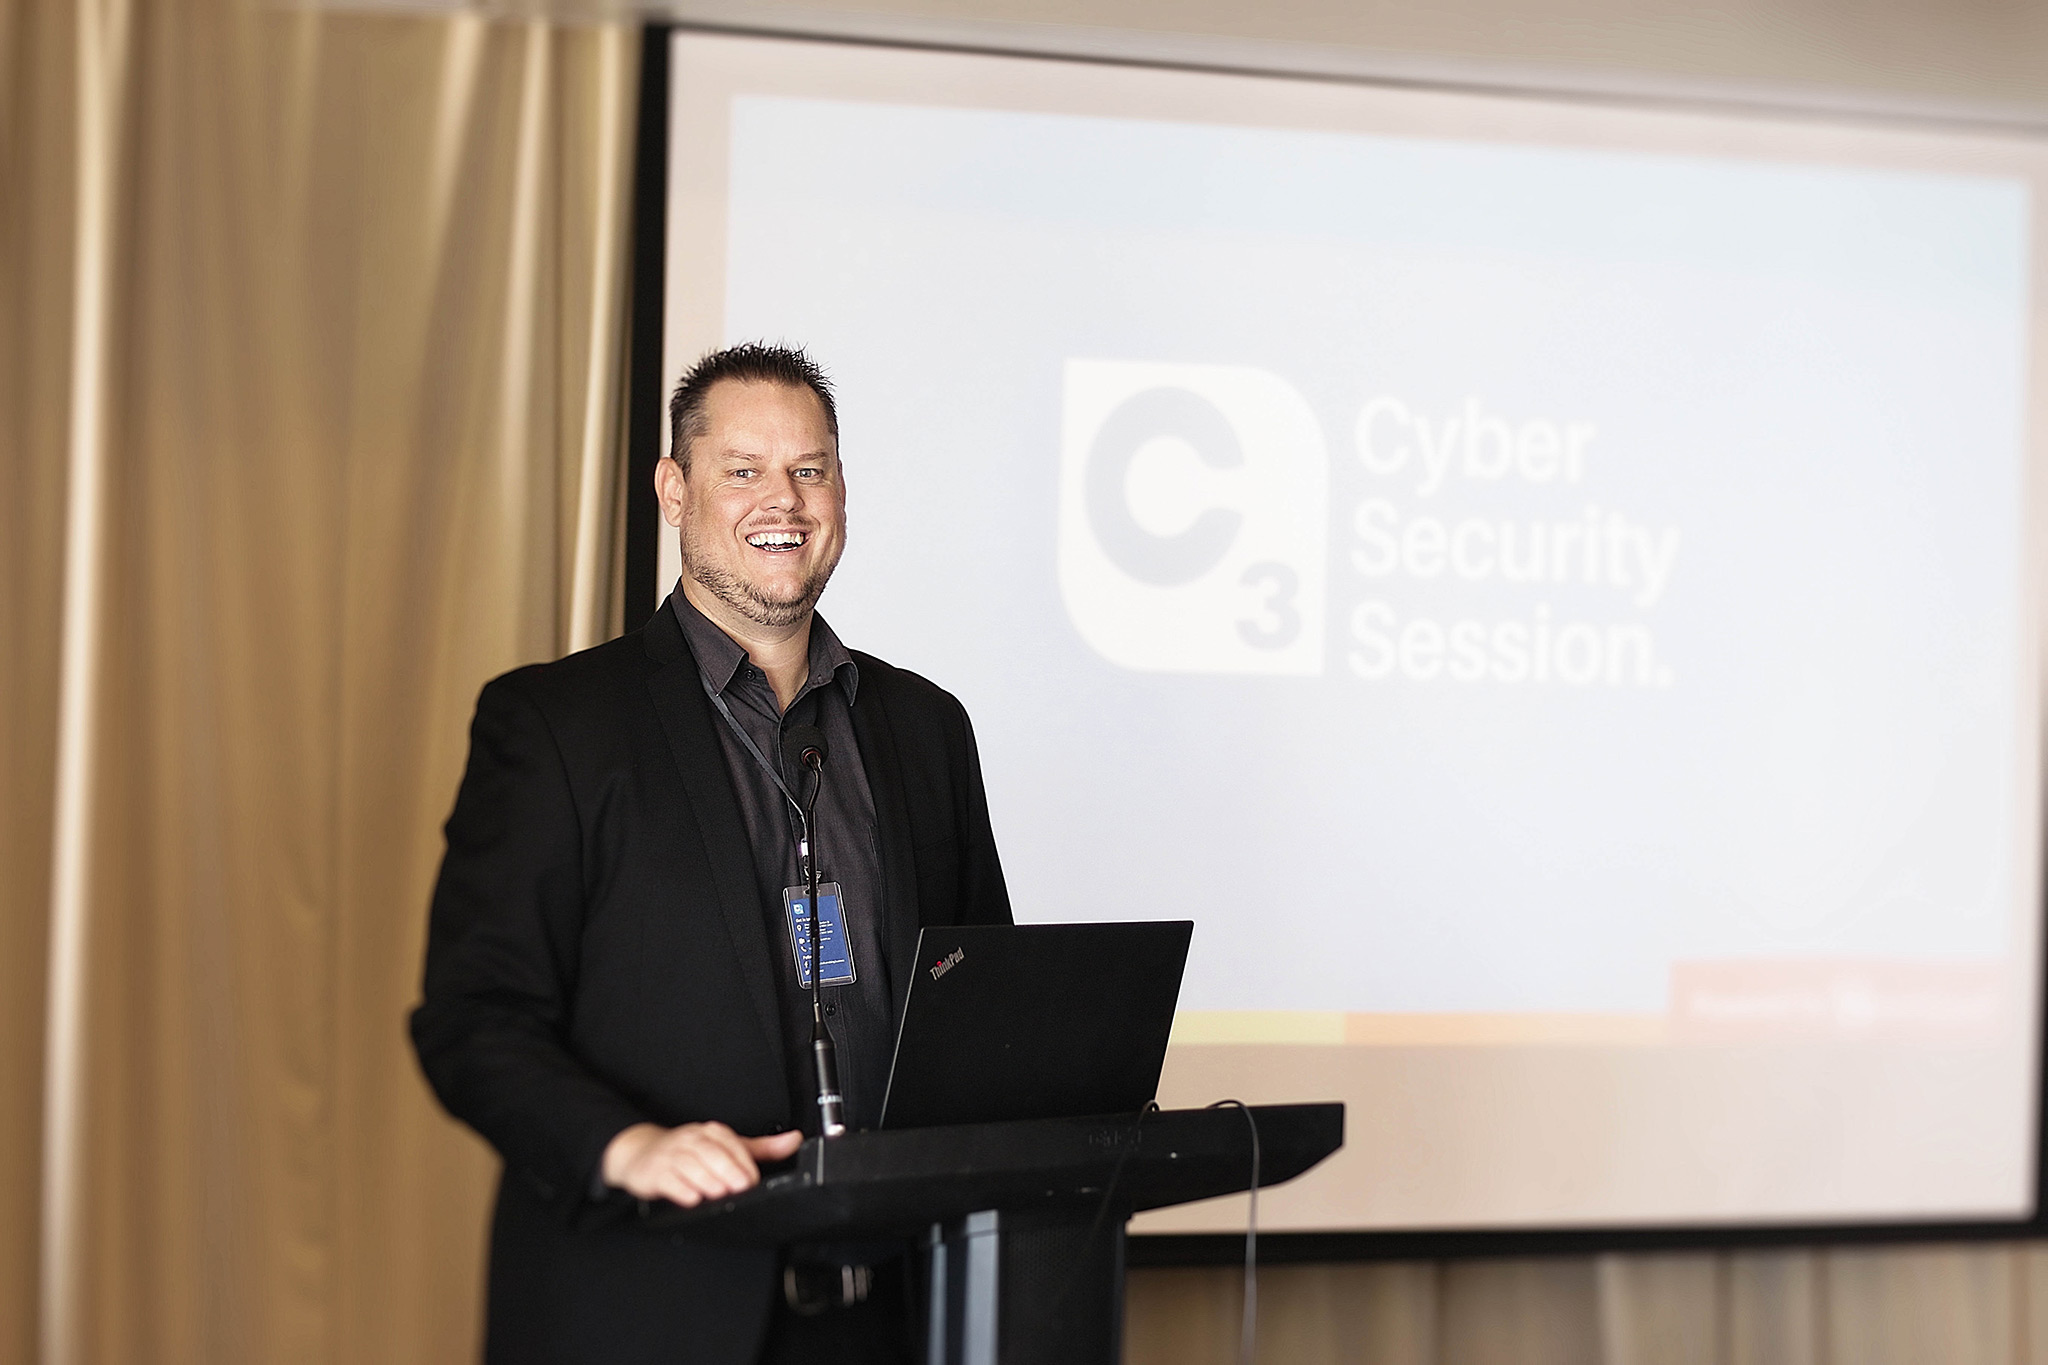 2019 Port Macquarie C3 Cyber Security Executive Lunch